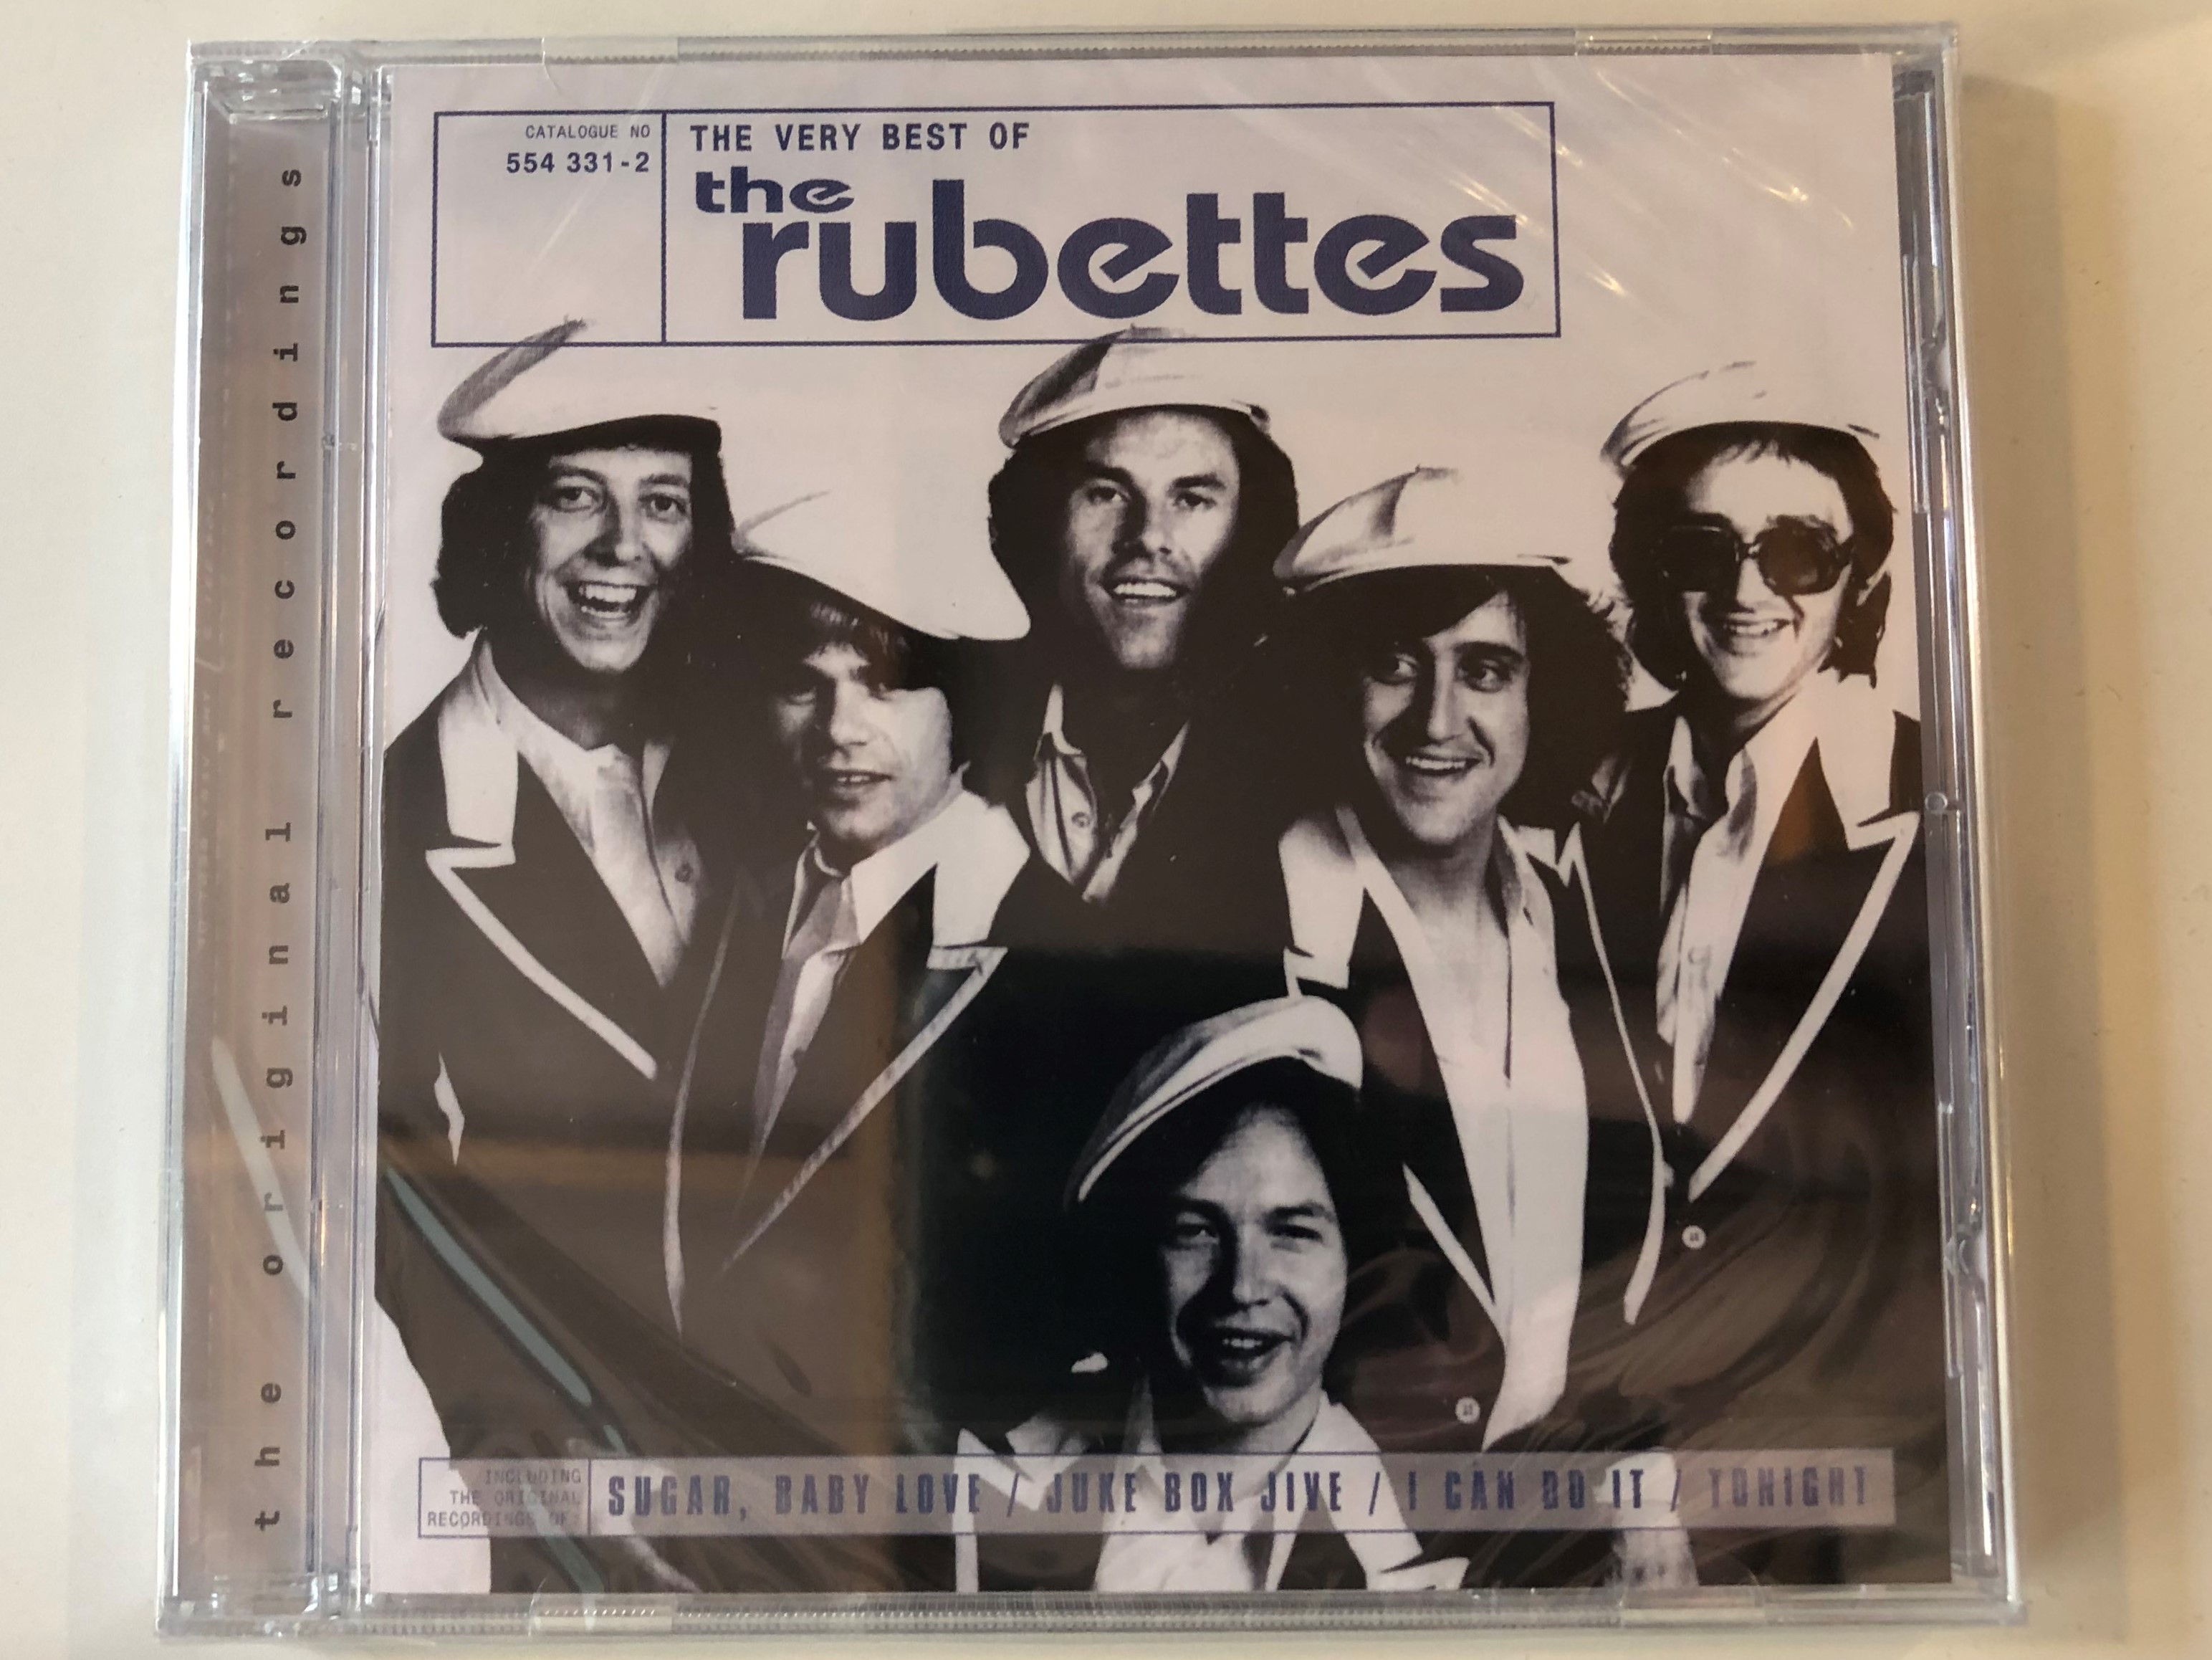 the-very-best-of-the-rubettes-including-sugar-baby-love-juke-box-jive-i-can-do-it-tonight-spectrum-music-audio-cd-1998-554-331-2-1-.jpg